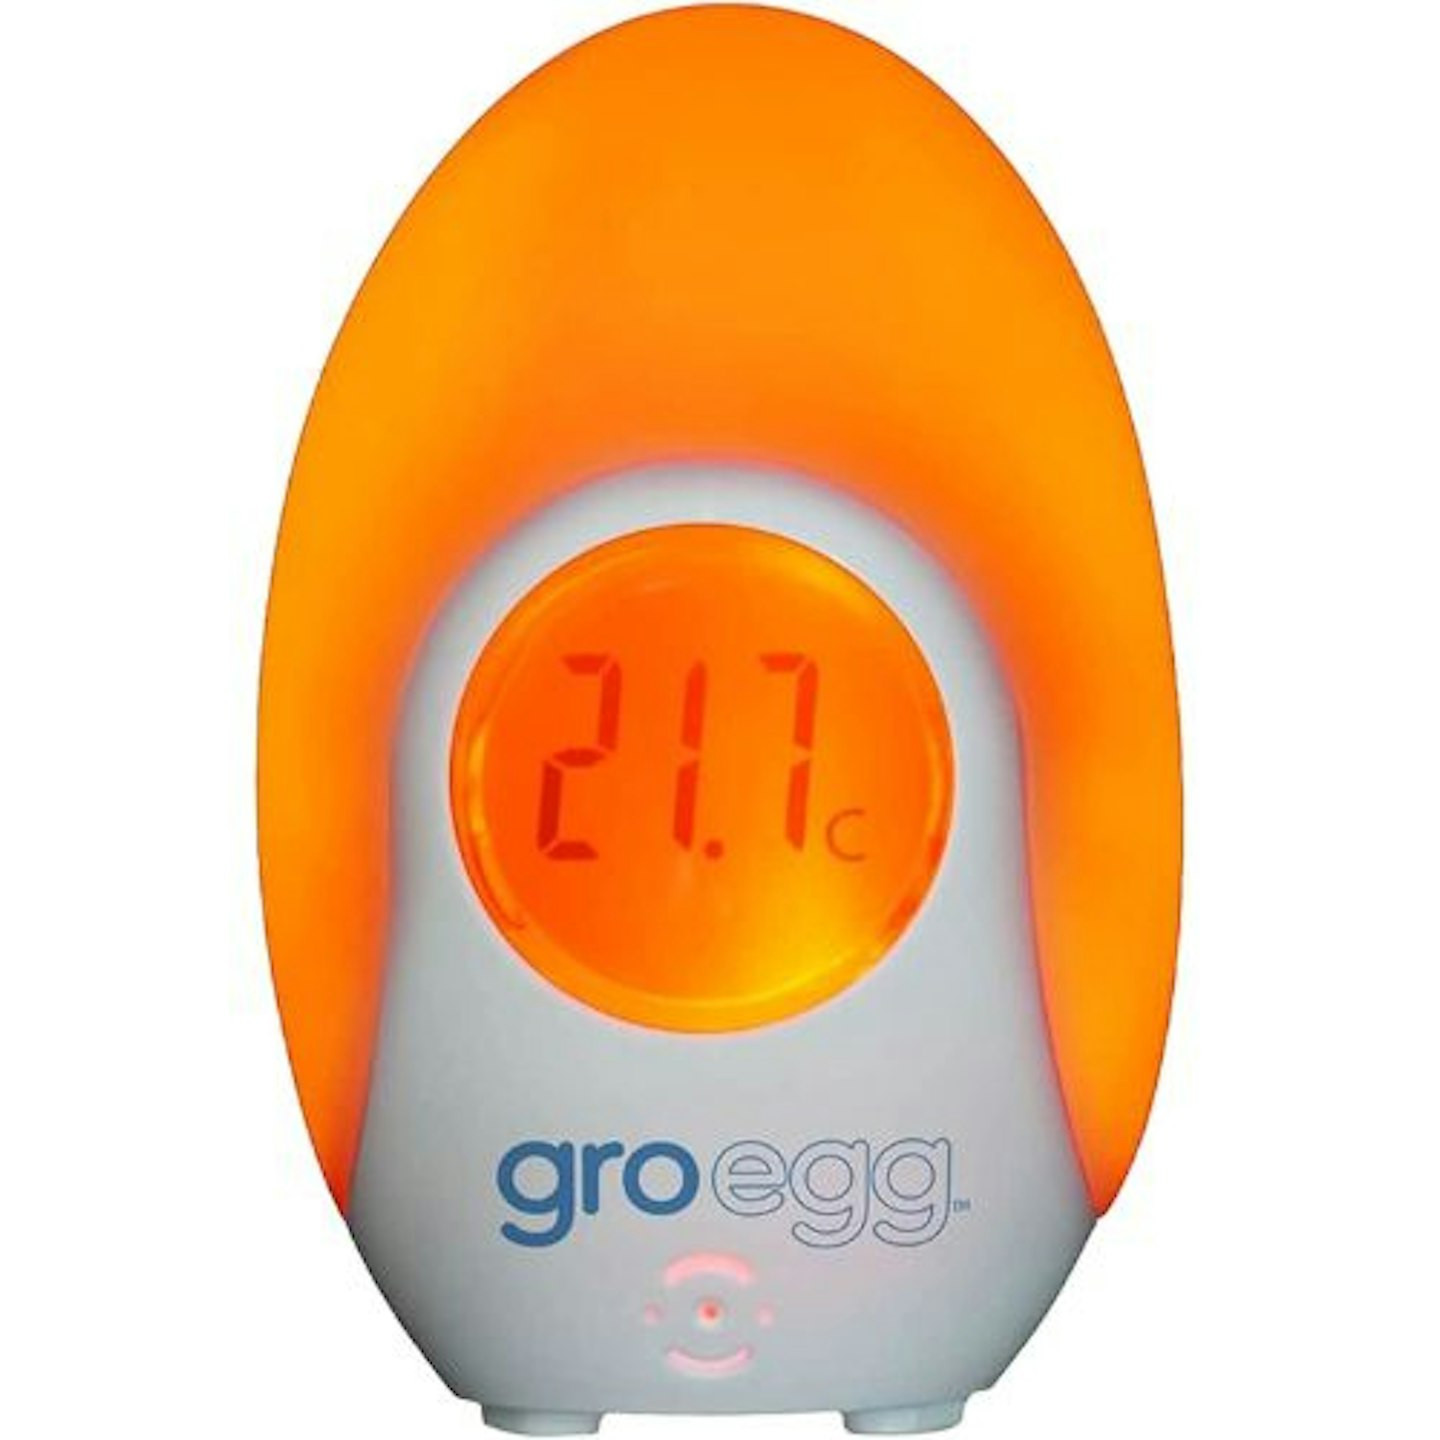 The best baby room thermometers 2022 - Netmums Reviews